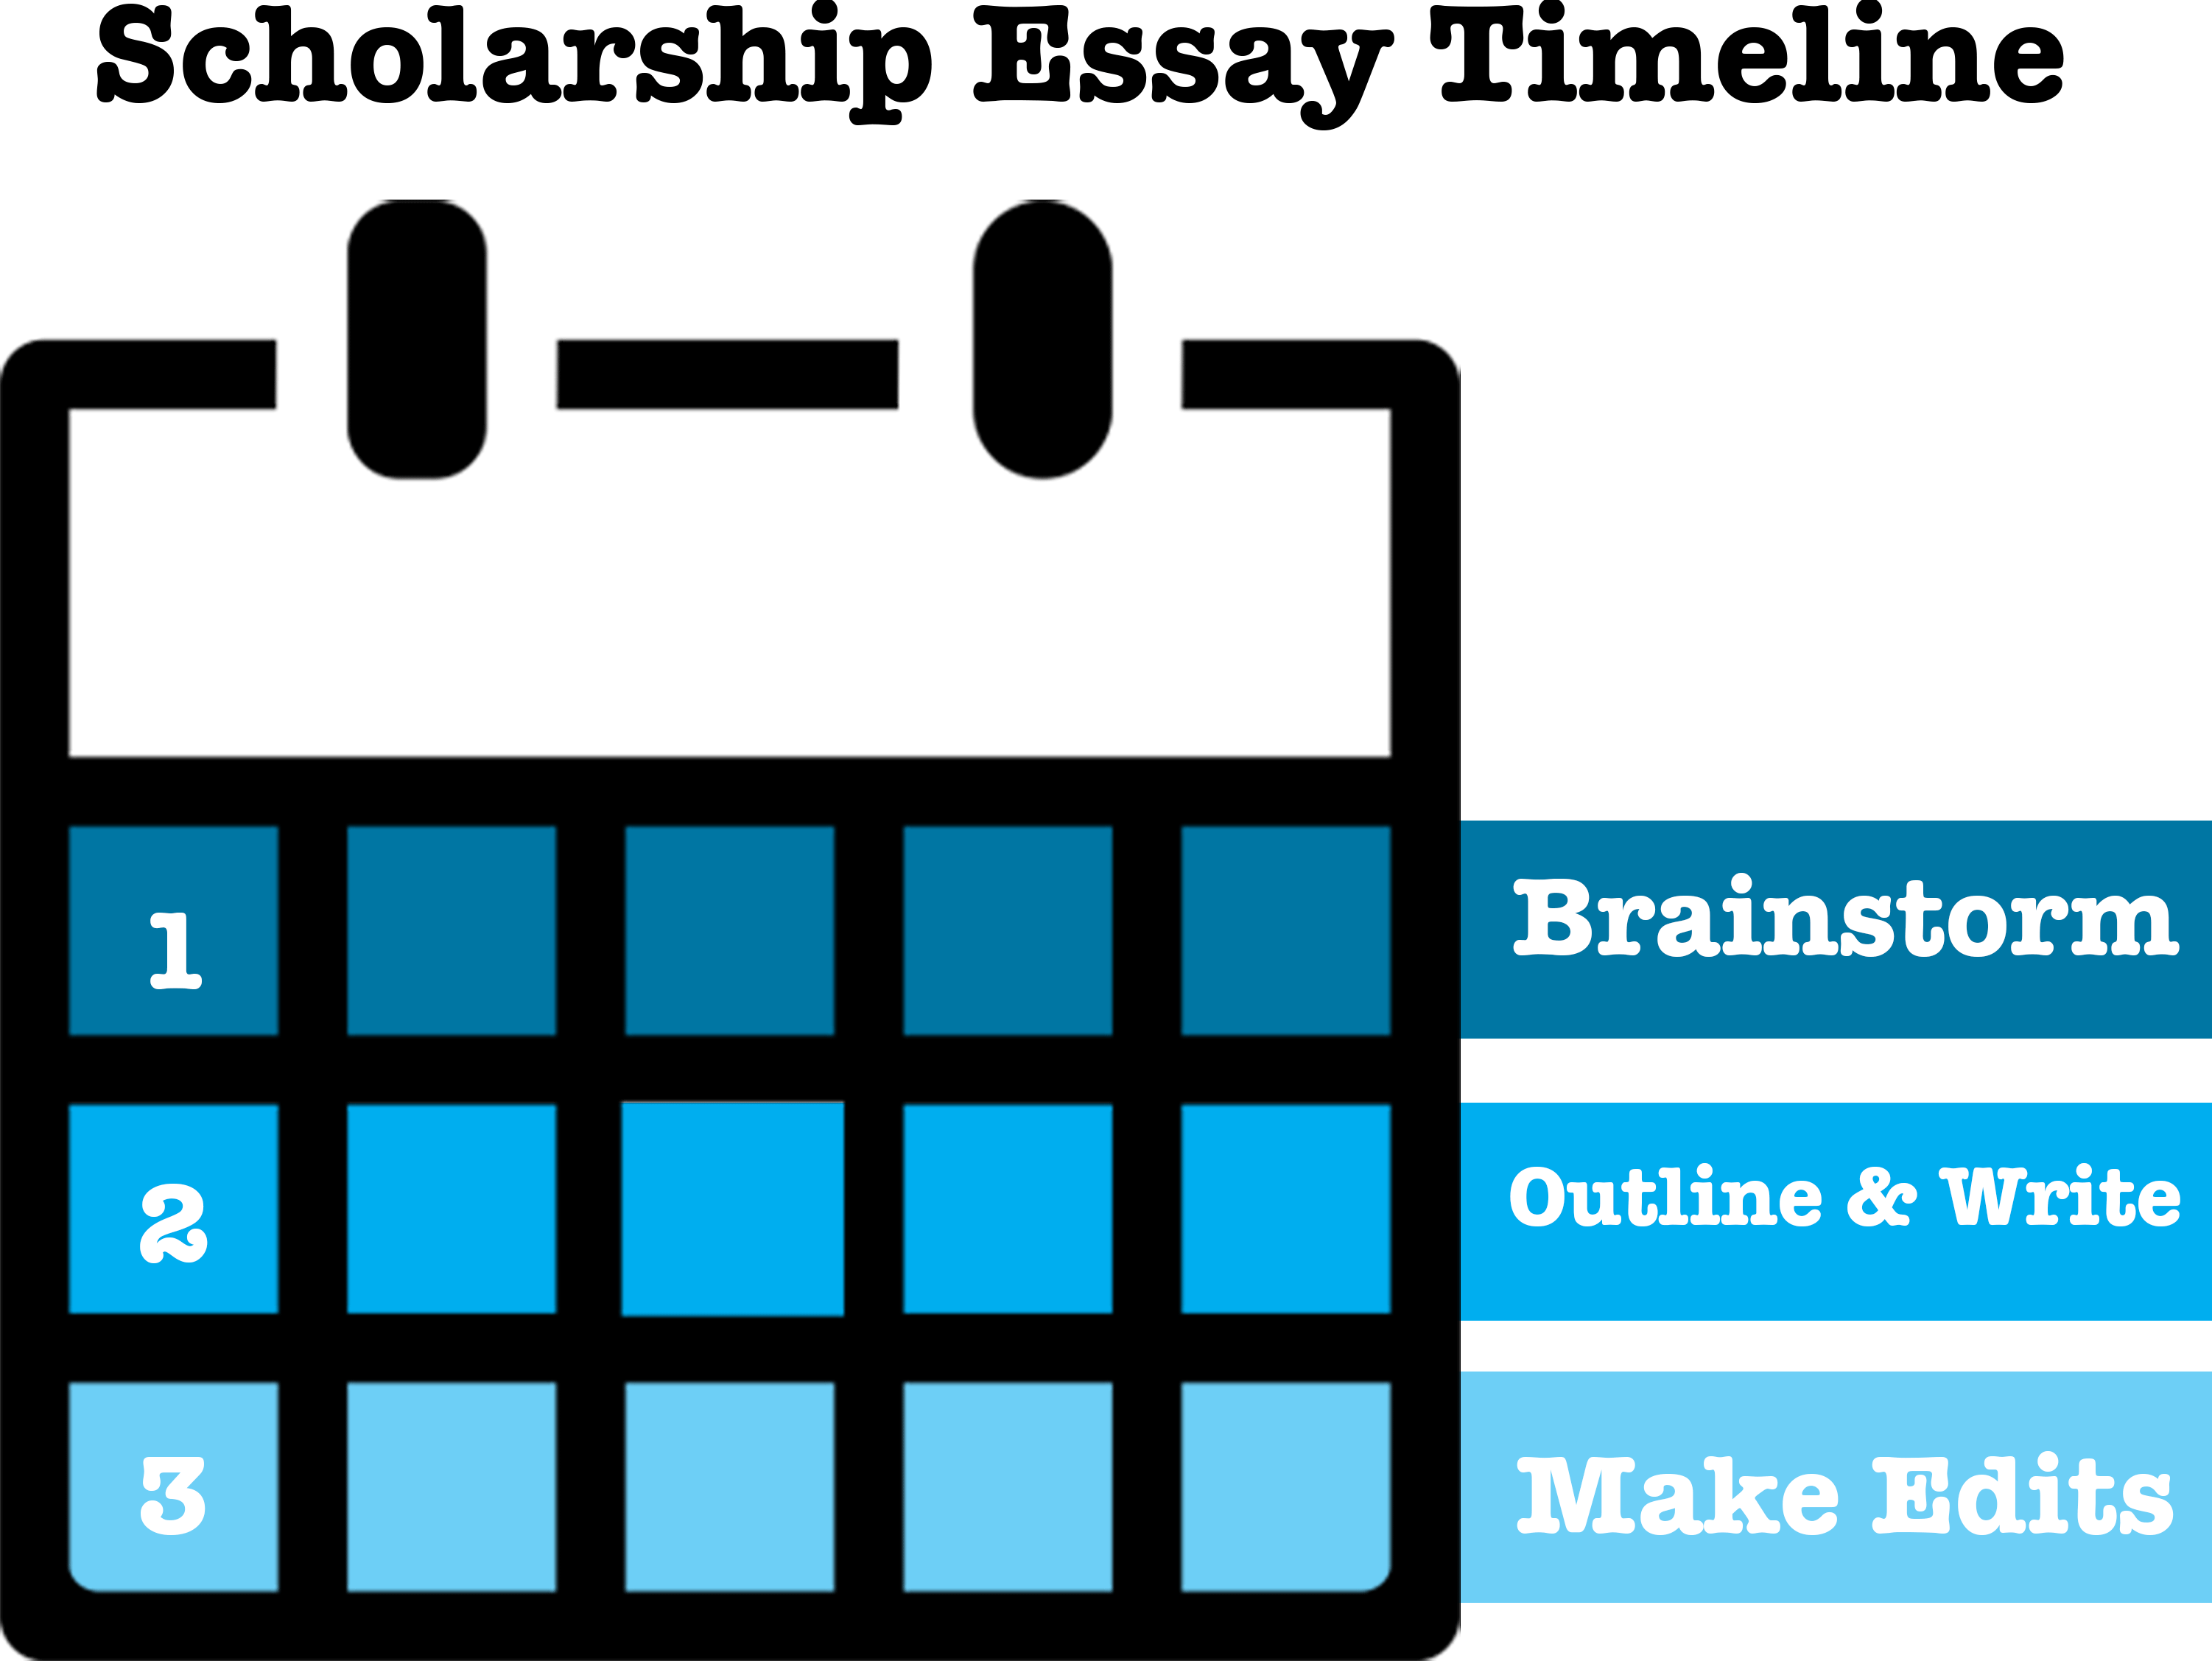 How to start a scholarship essay about yourself